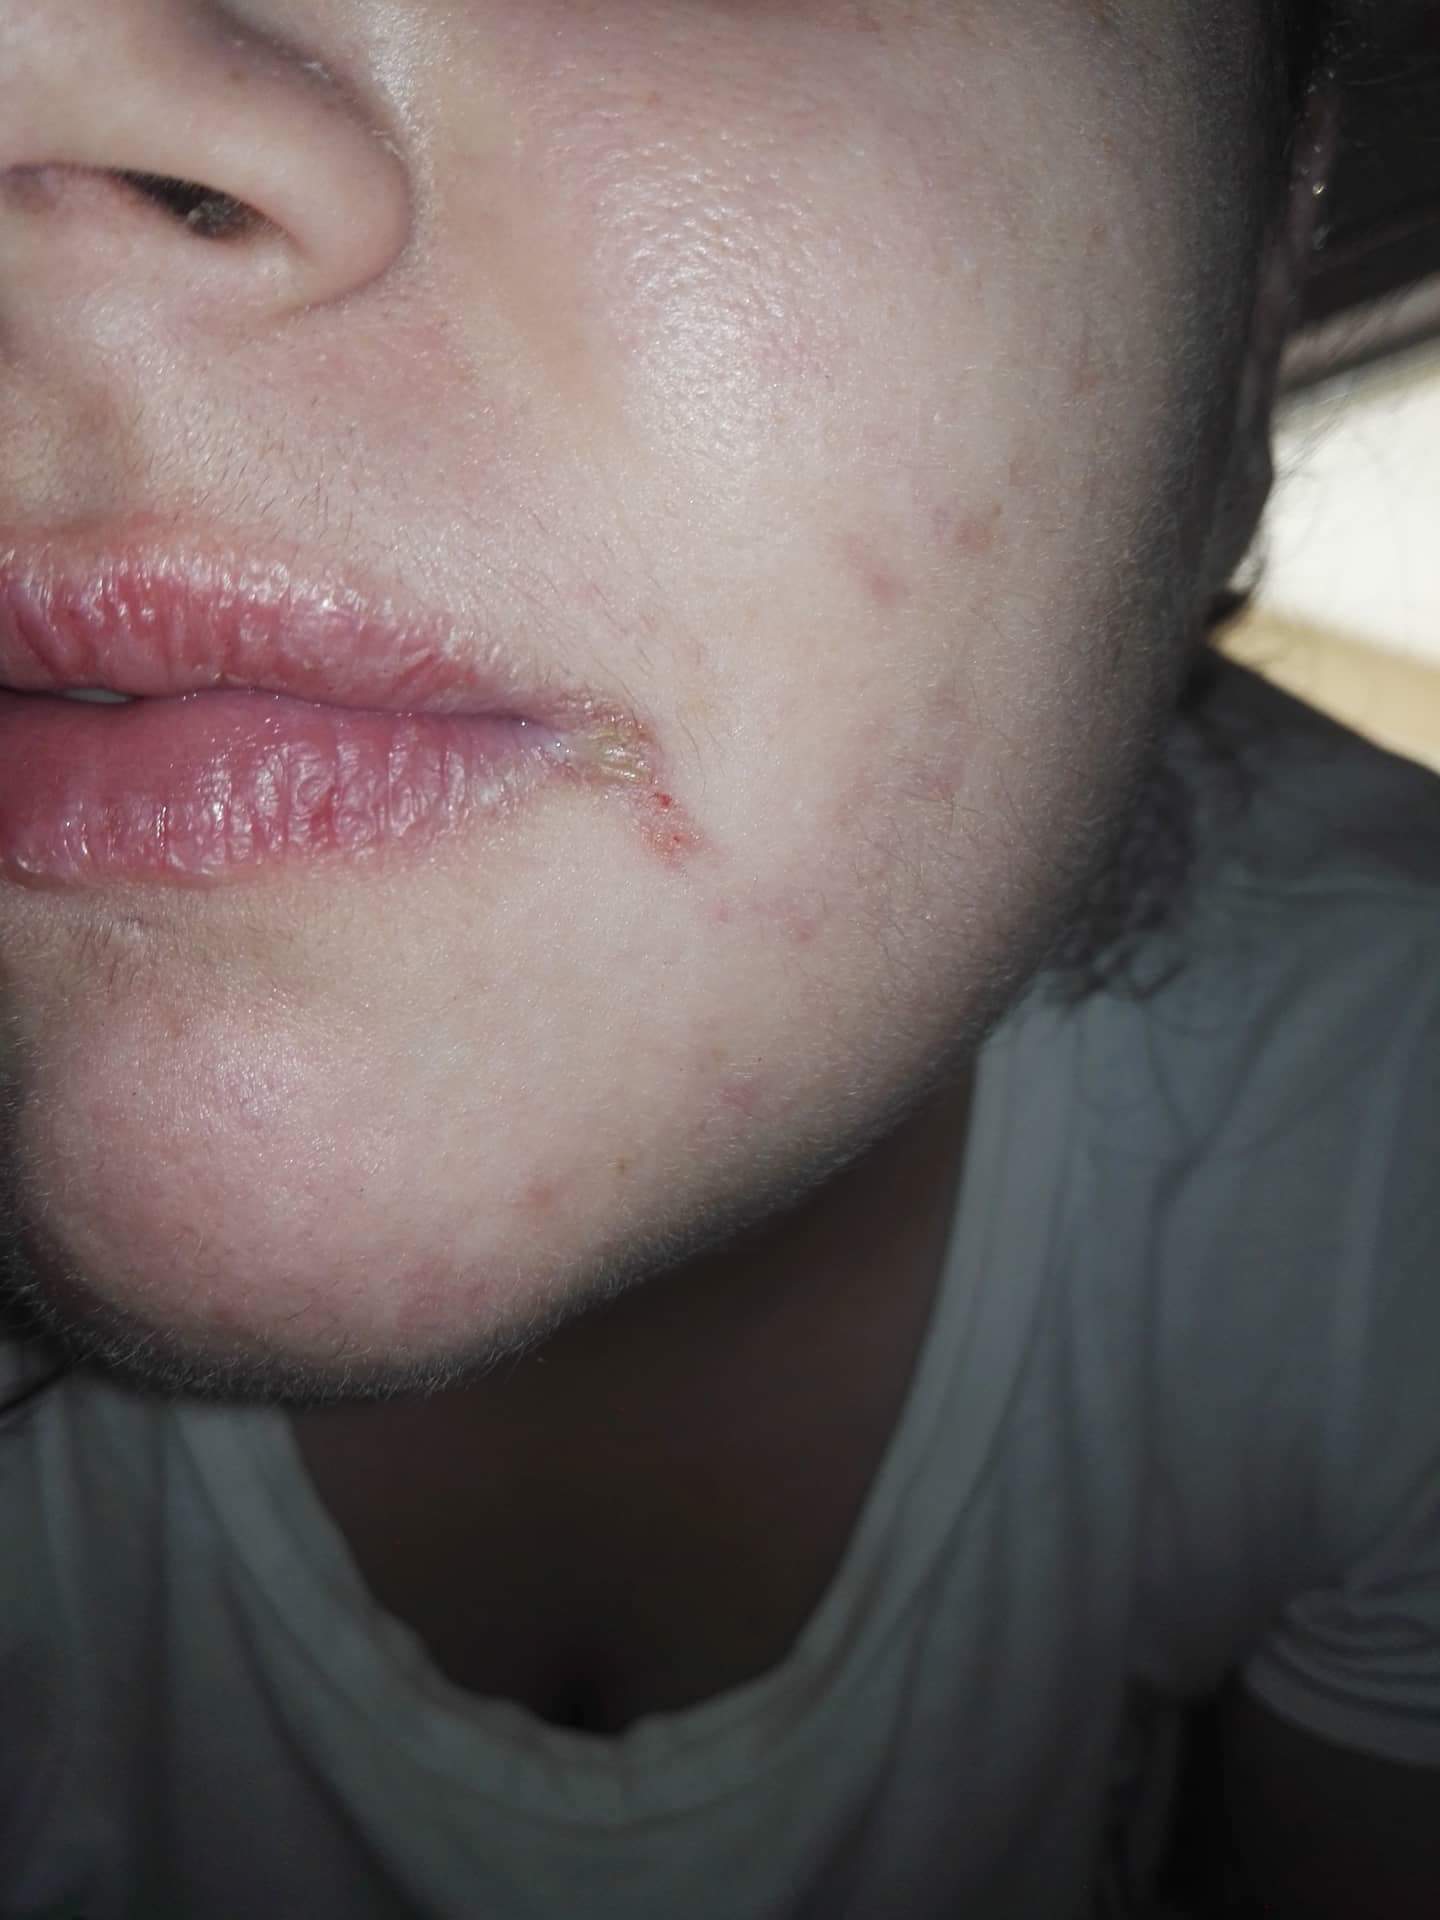 Is it an infection on the corner of my mouth? Or oral herpes? : Accutane